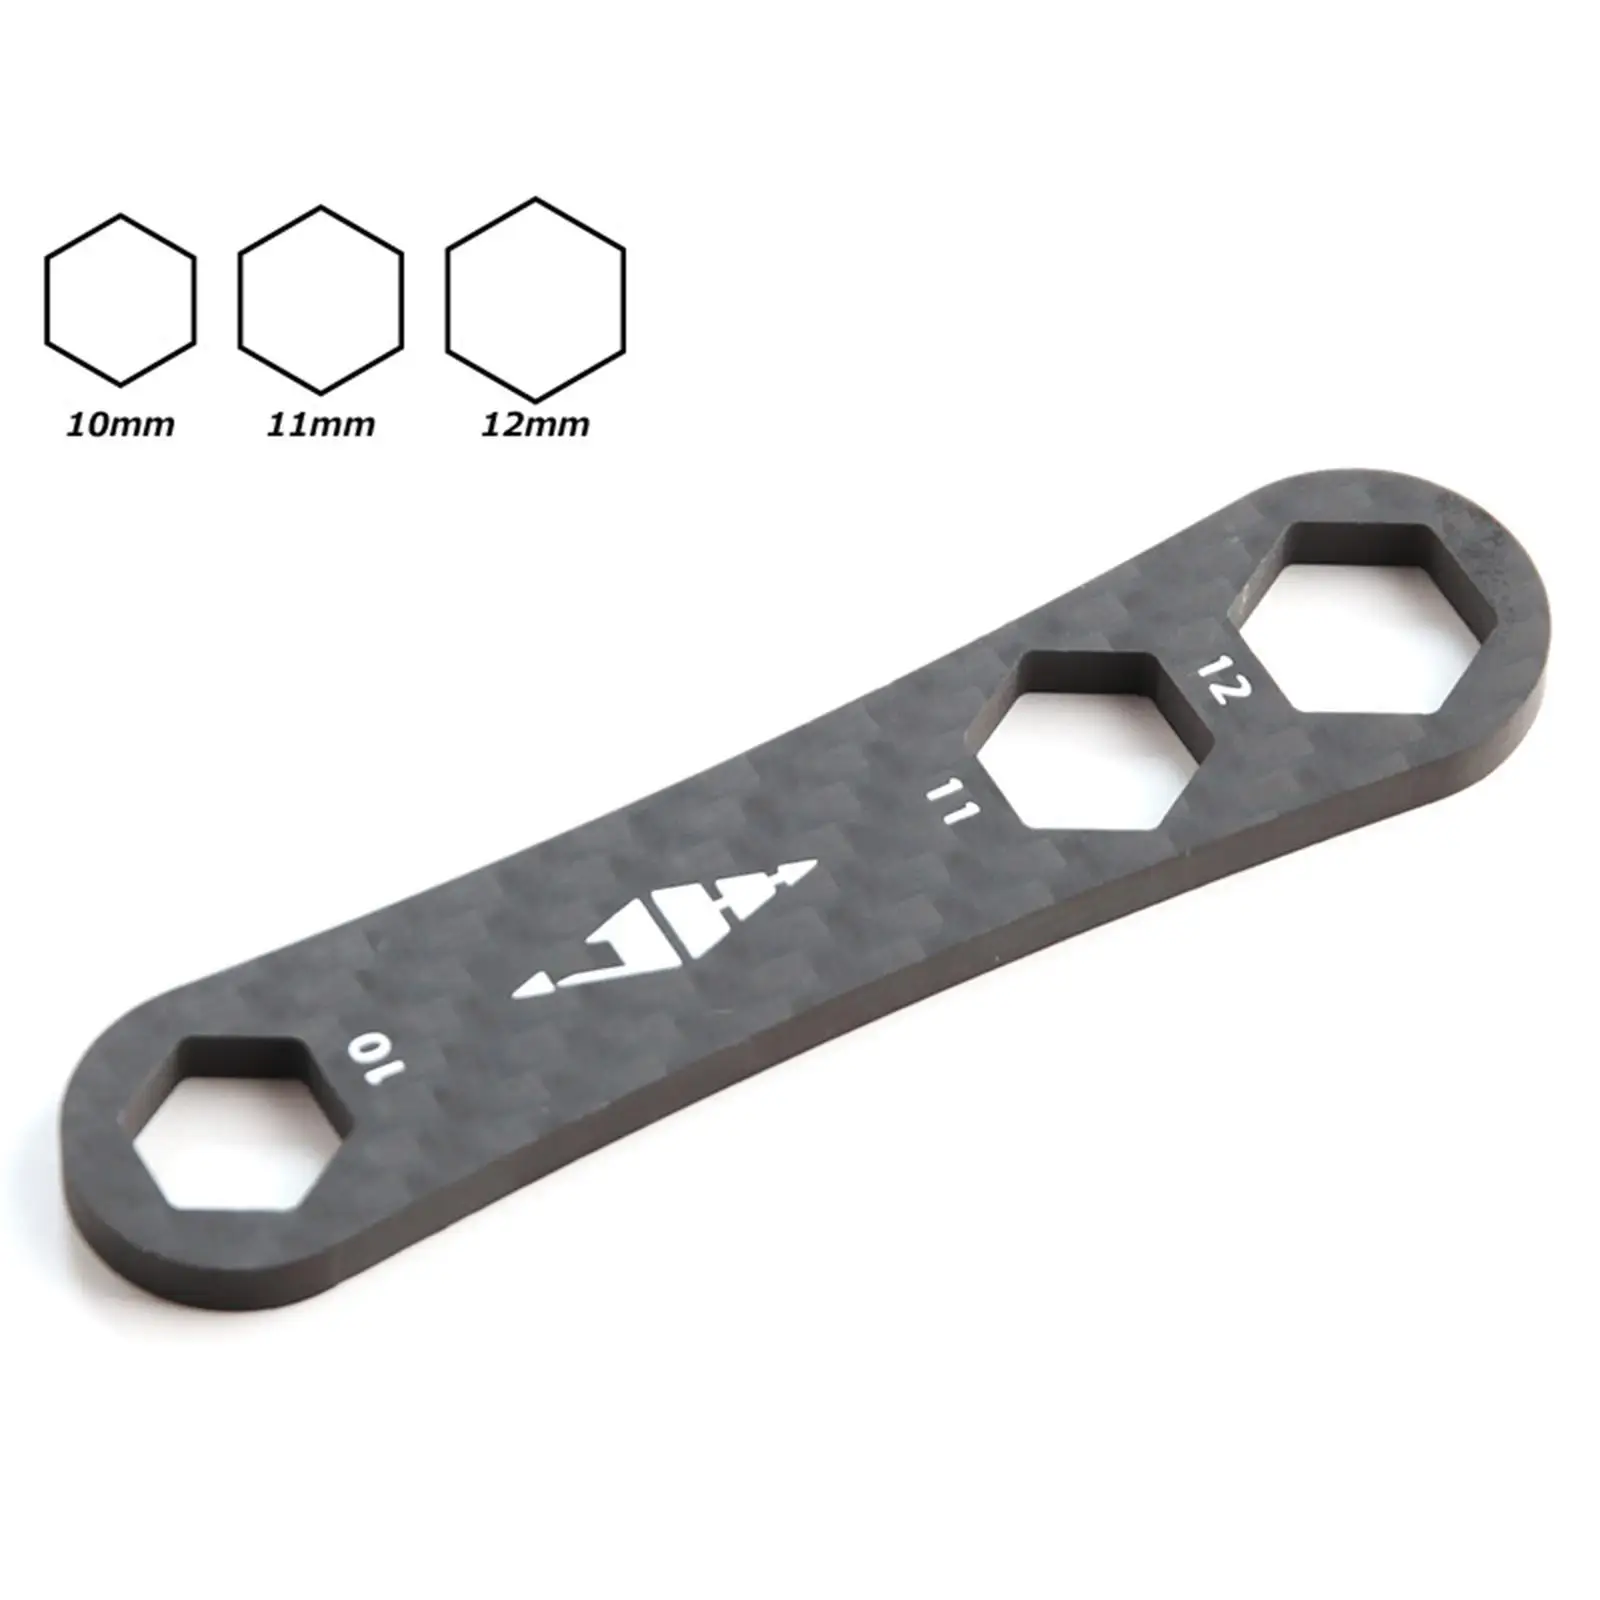 Outdoor Fishing Reel Care Maintenance Wrench Wrench for Outdoor Activities Fishing Enthusiasts